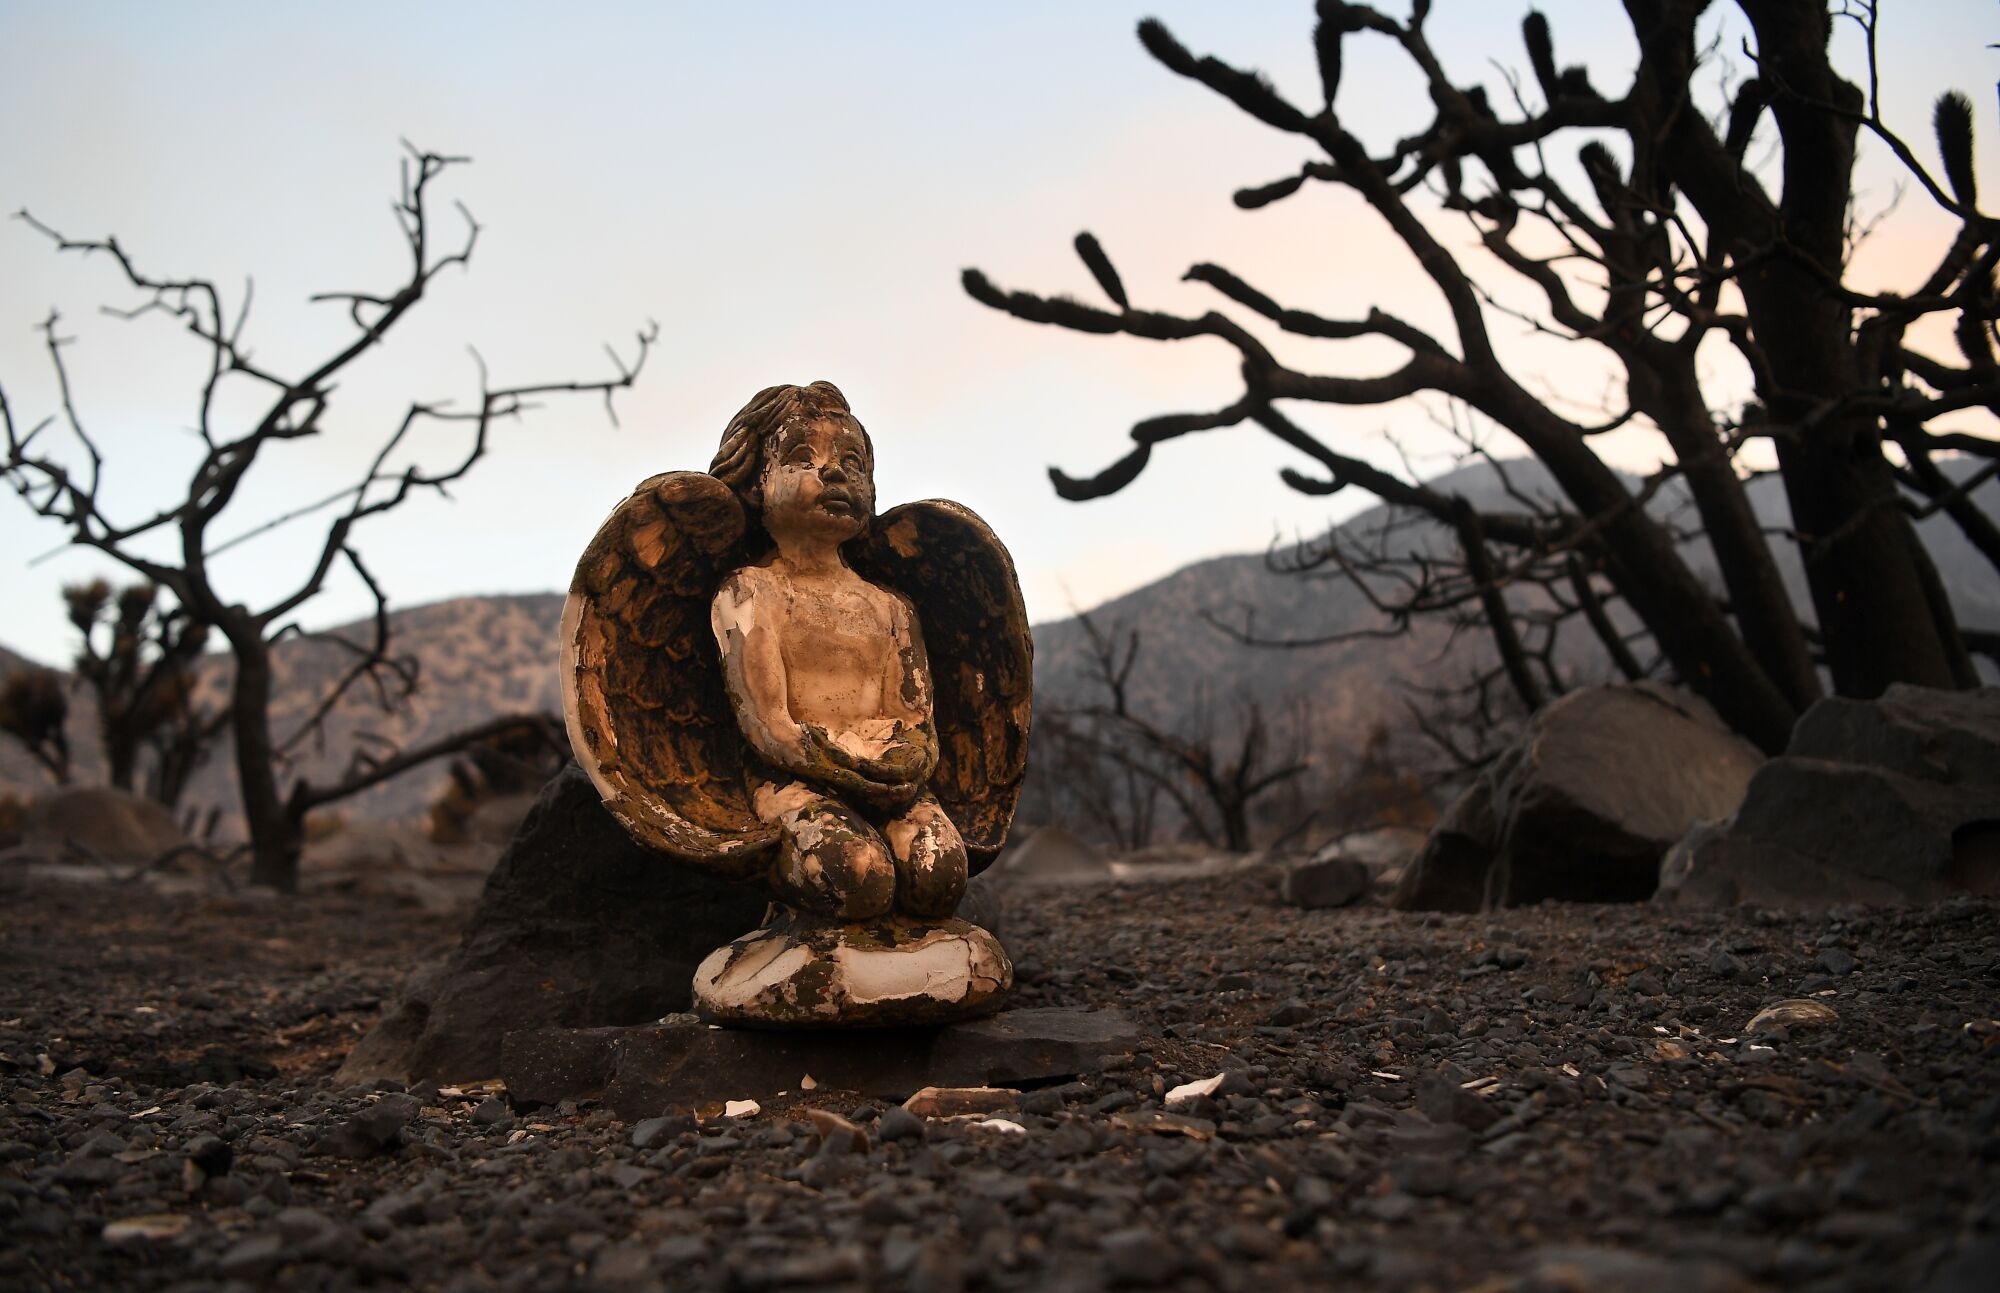 A burned statue of a baby angel in Juniper Hills on Saturday, Sept. 19.